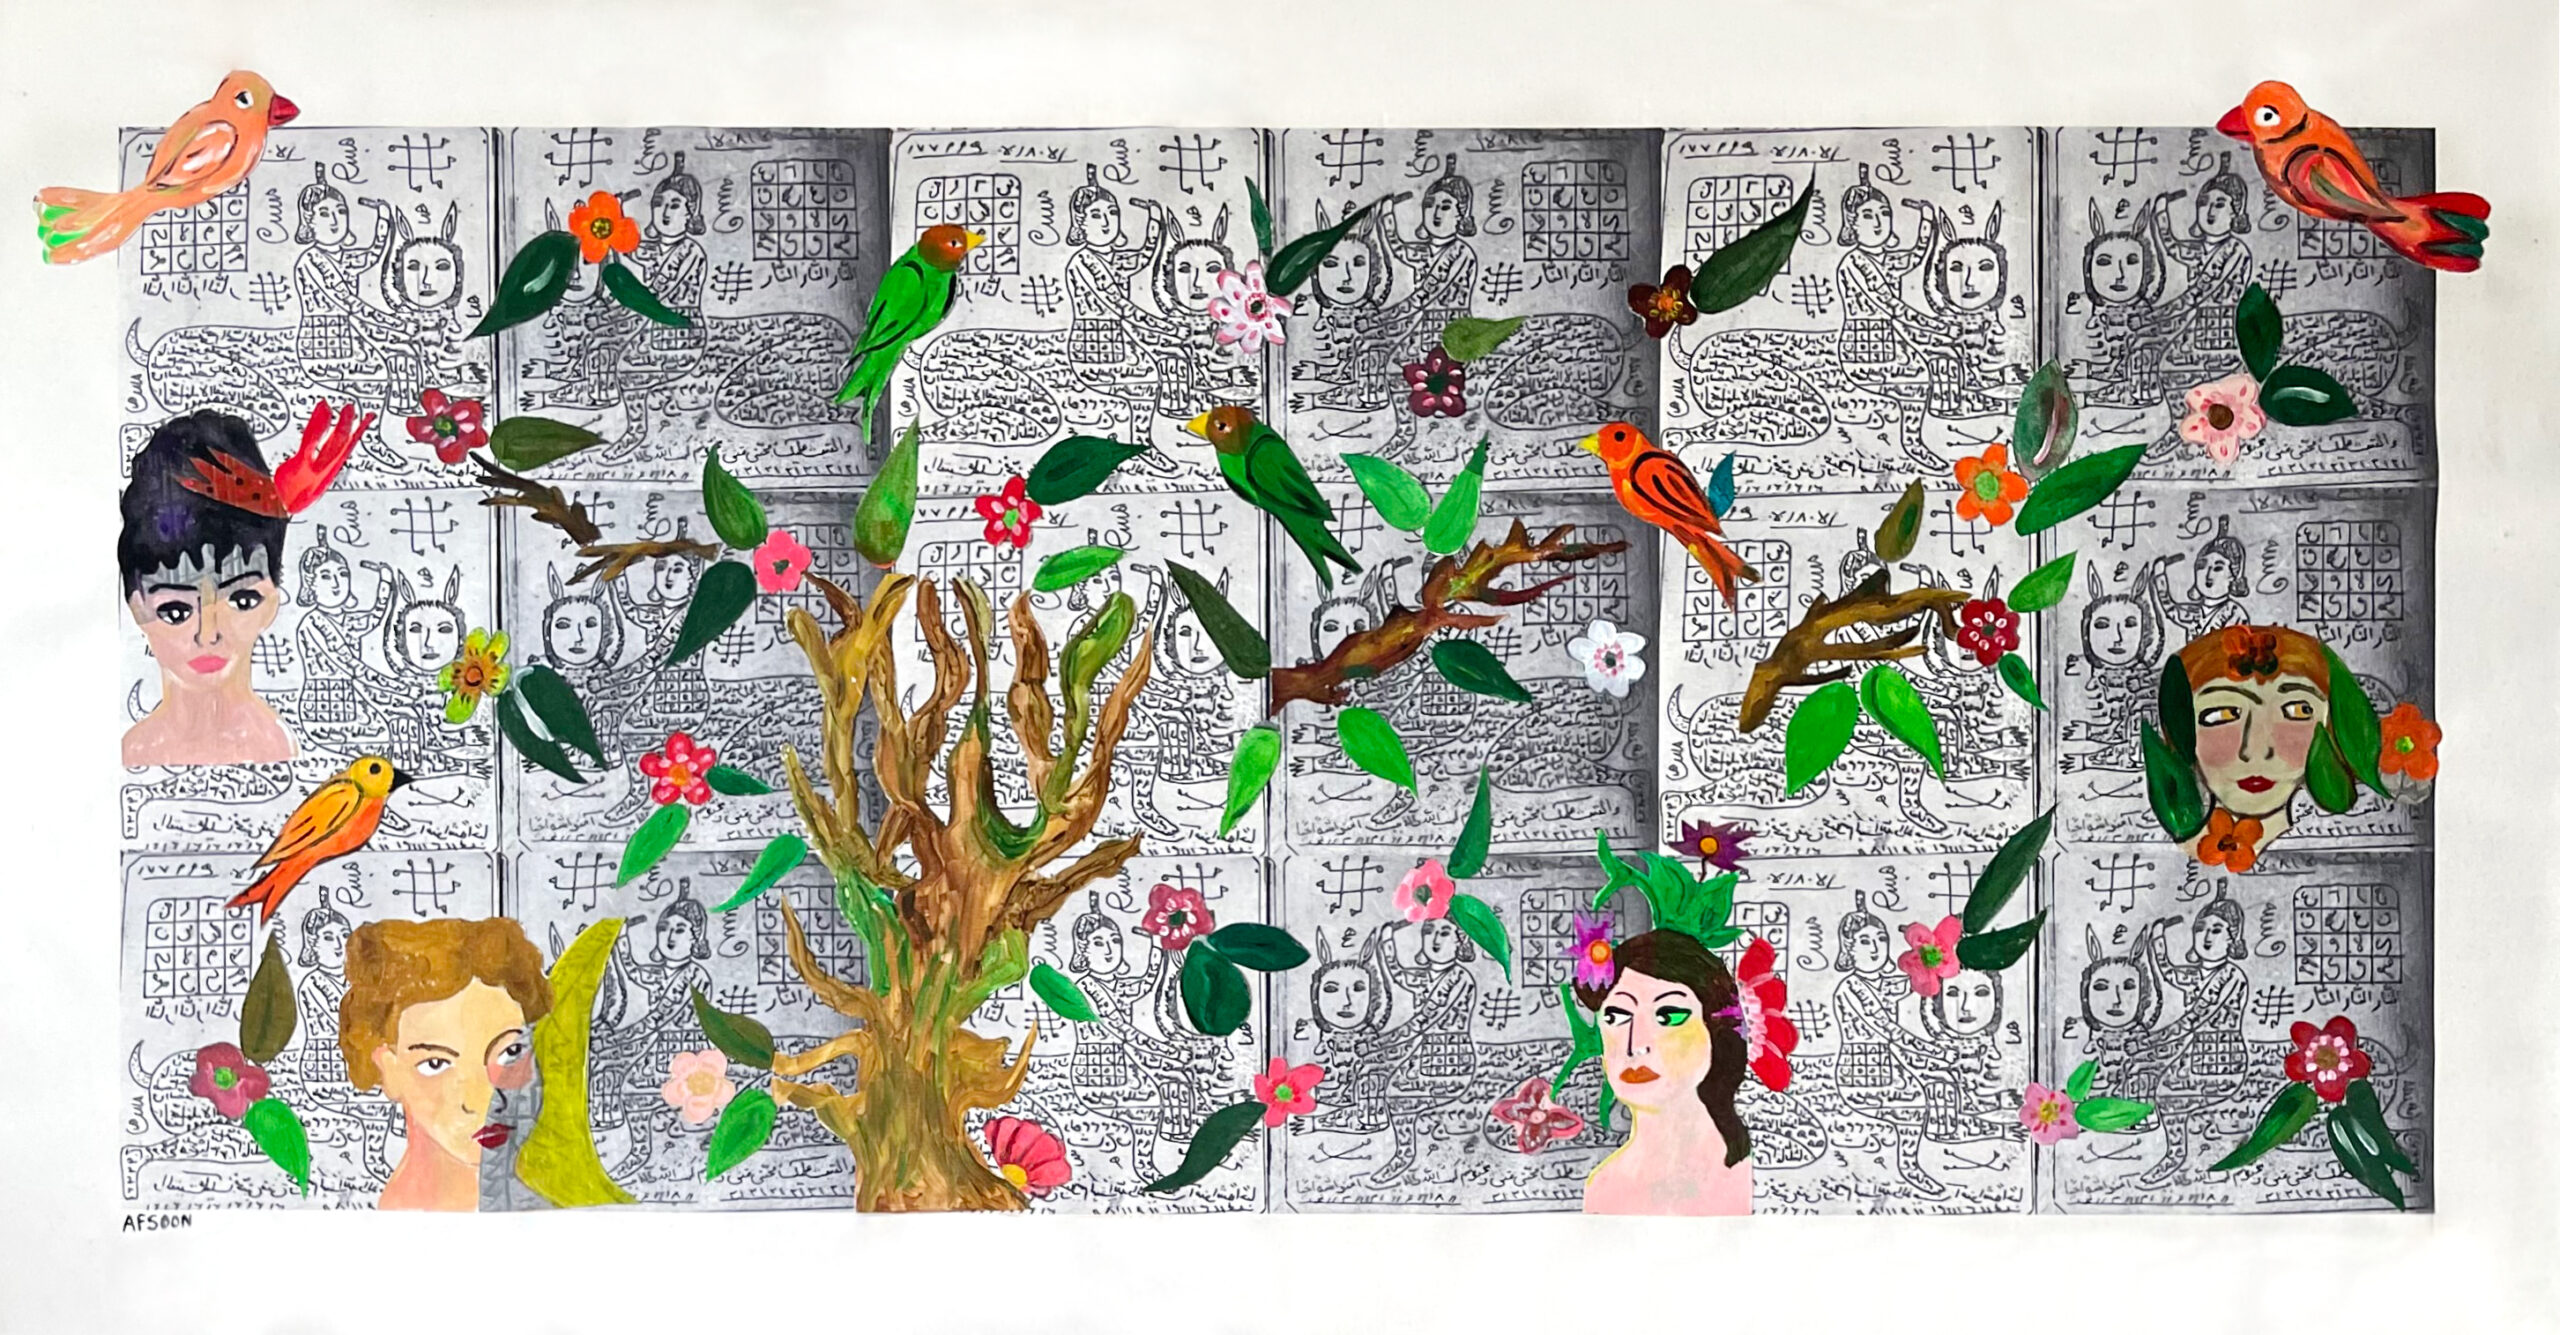 Artwork titled "The Forest of Bewitchment" attributed to Afsoon, Iranian contemporary artist. Acrylic on printed canvas; 35.5 x 67 inches. The painting is part of Afsoon's solo exhibition.